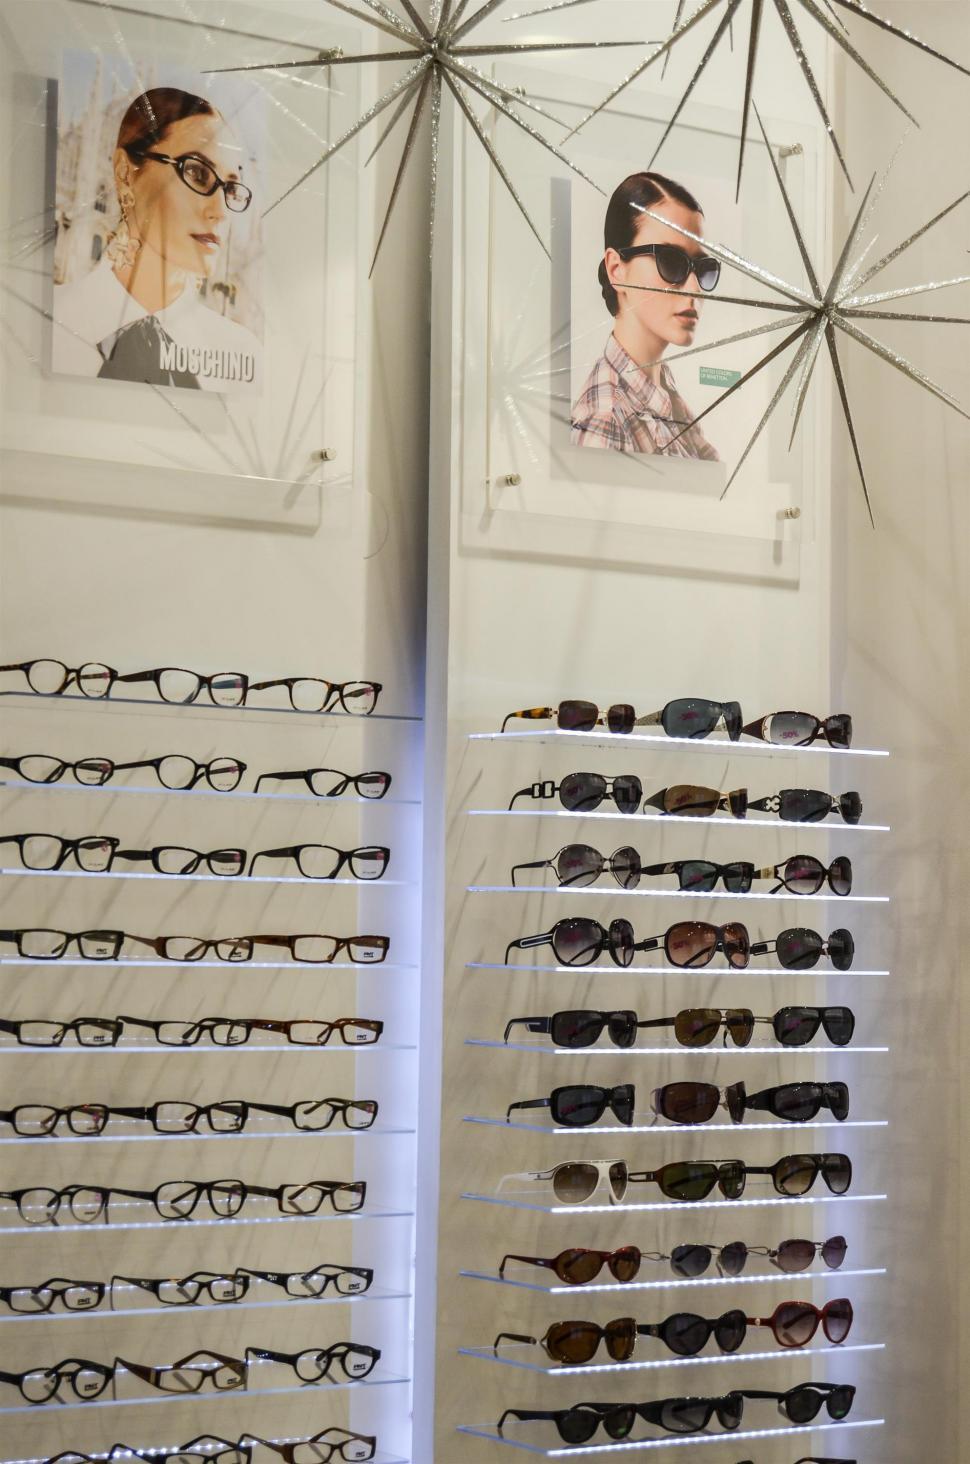 Free Image of Glasses Display With Woman Portrait 